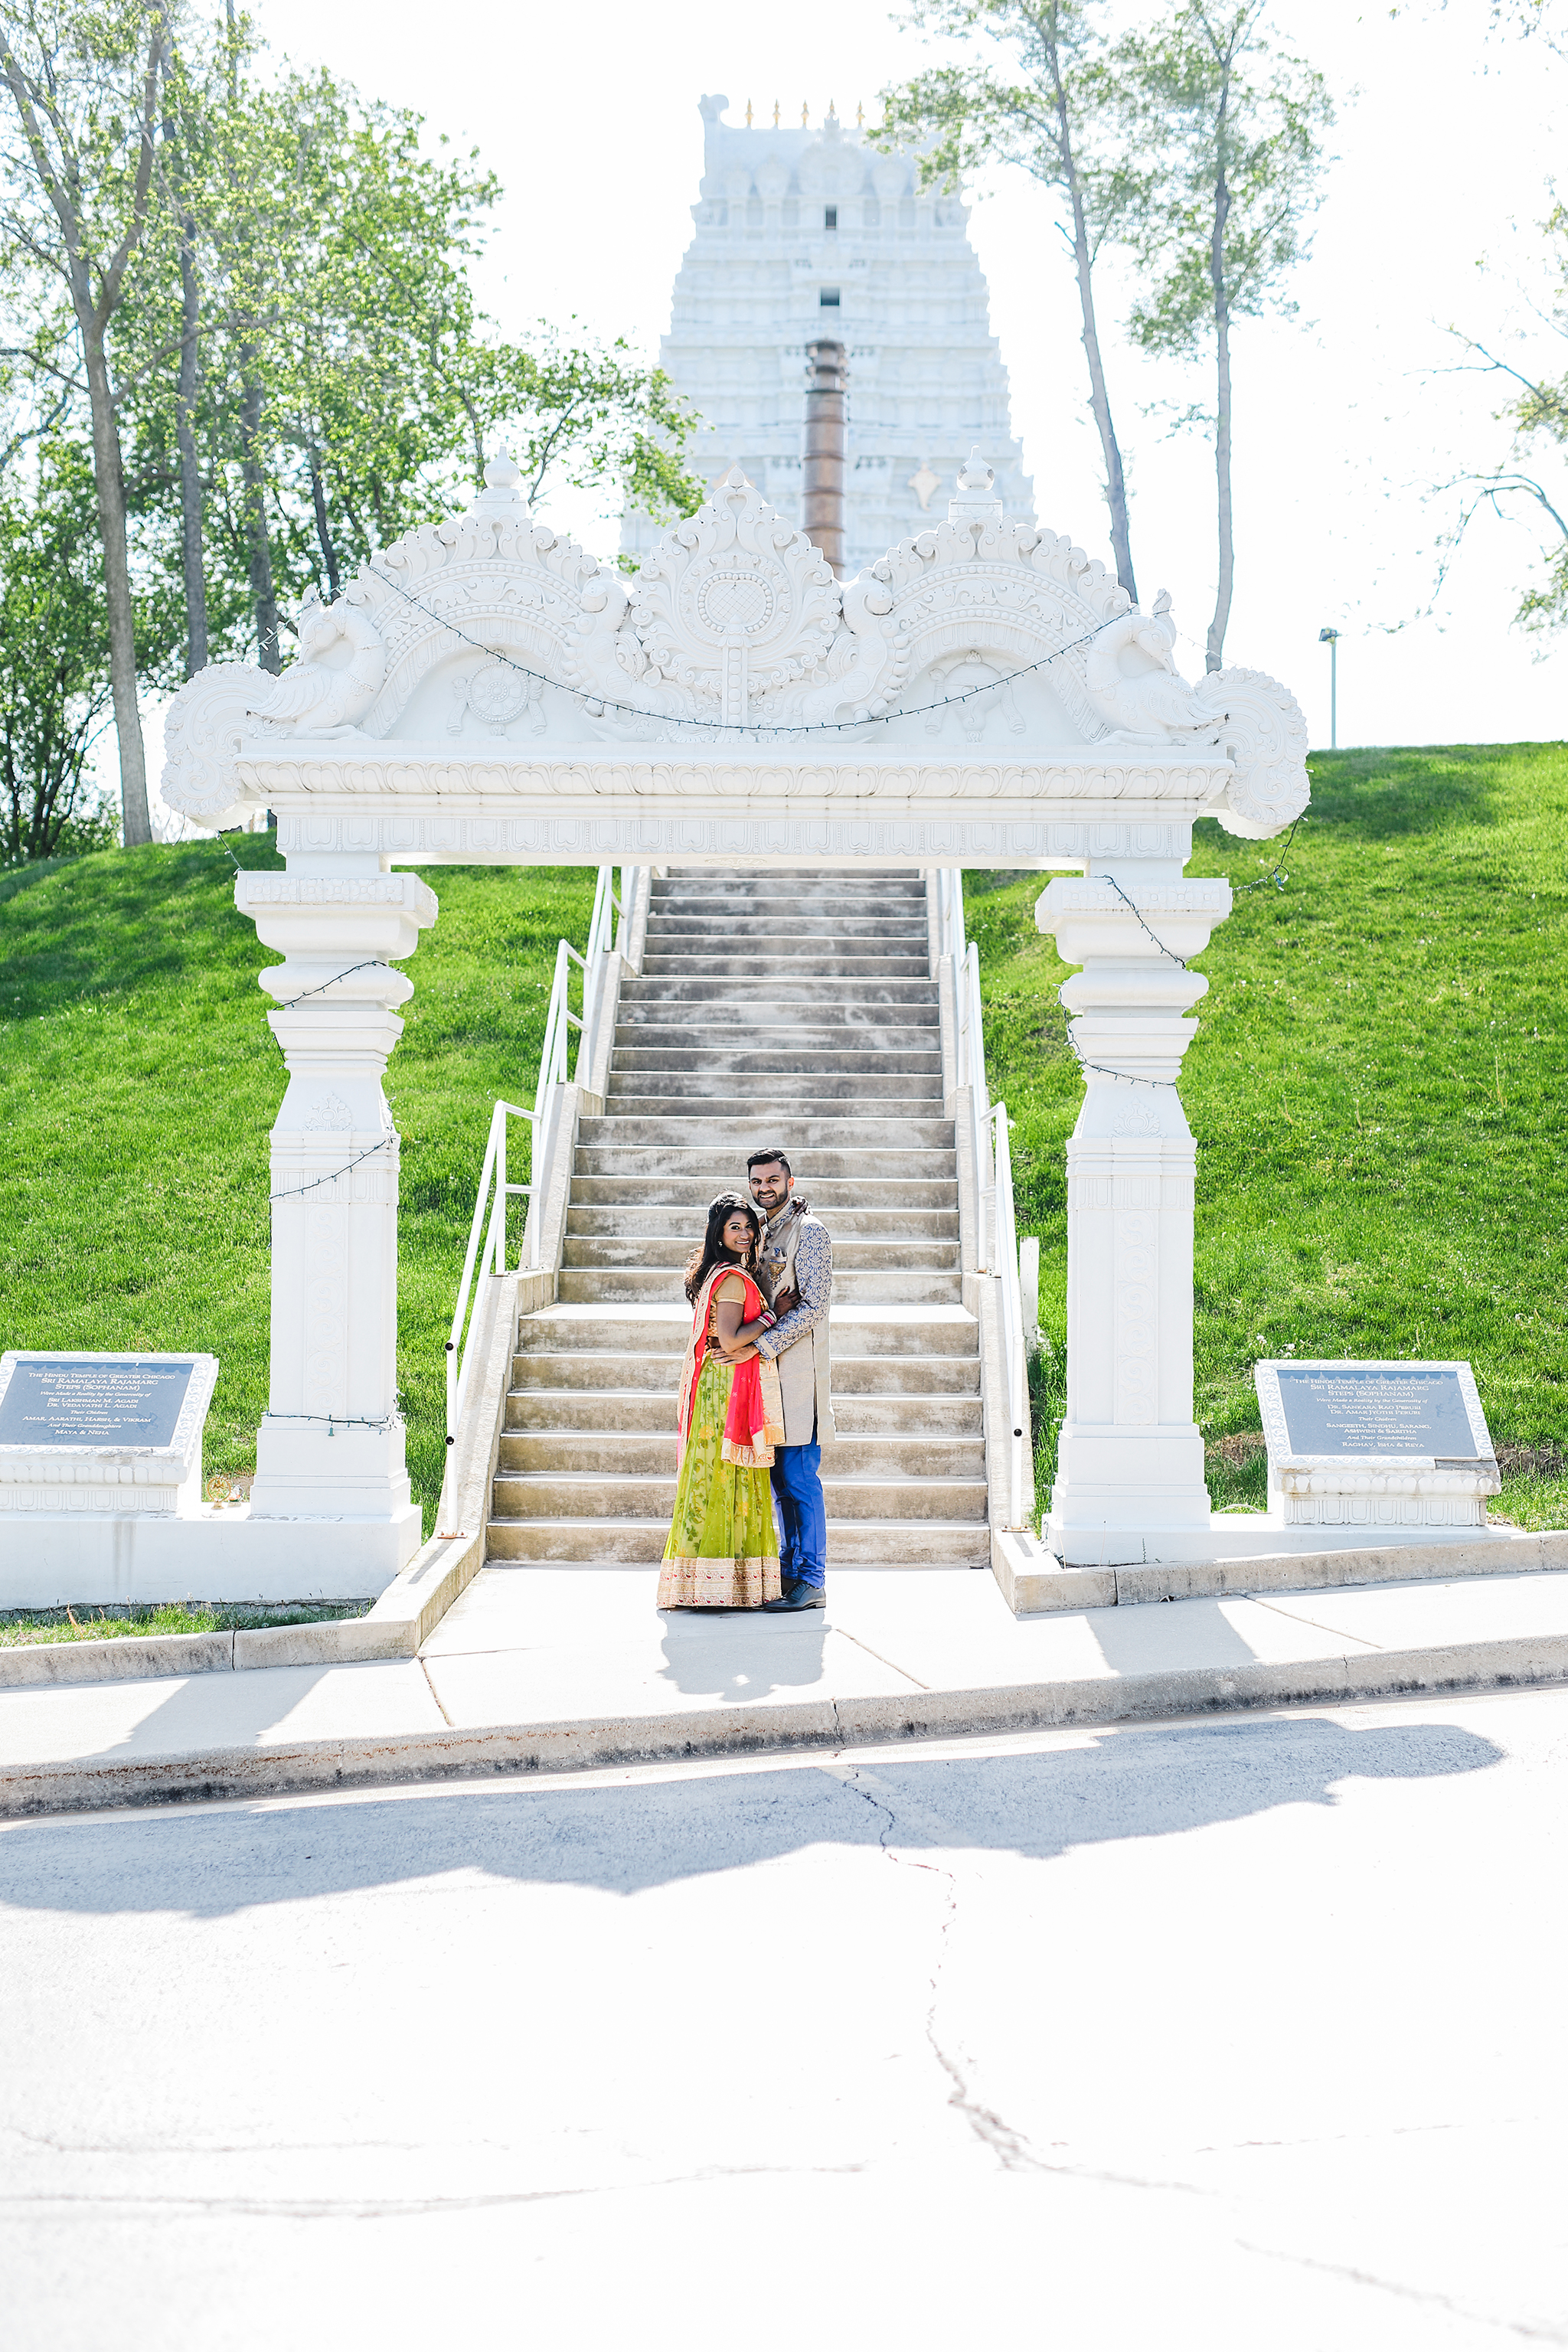 The Hindu Temple of Greater Chicago